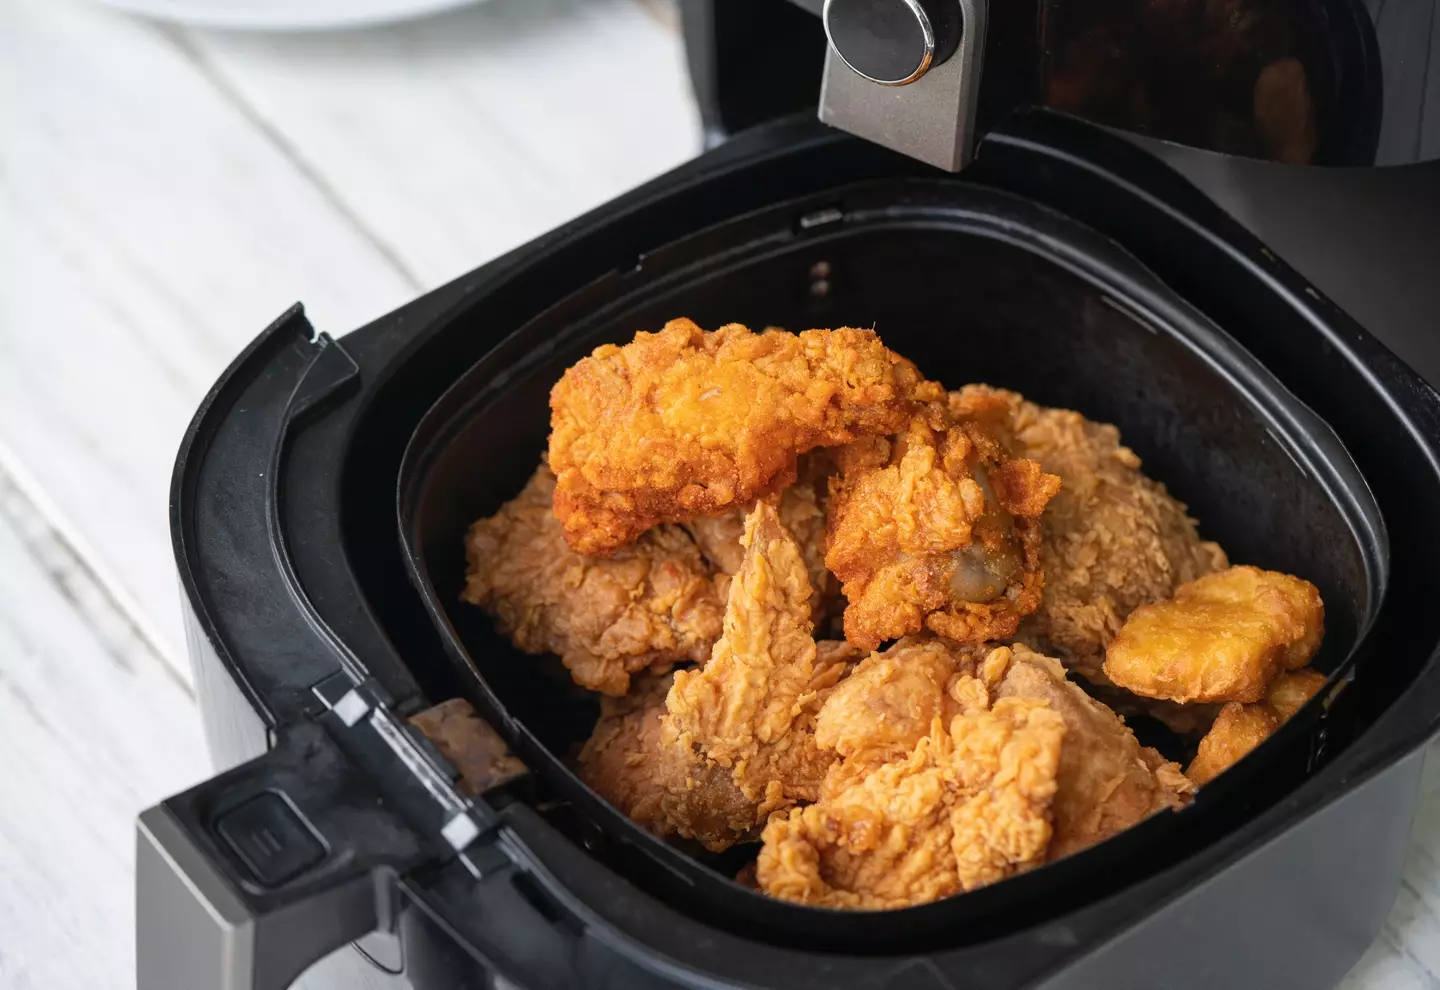 Food with wet batter like fried chicken create a right mess, the experts said.